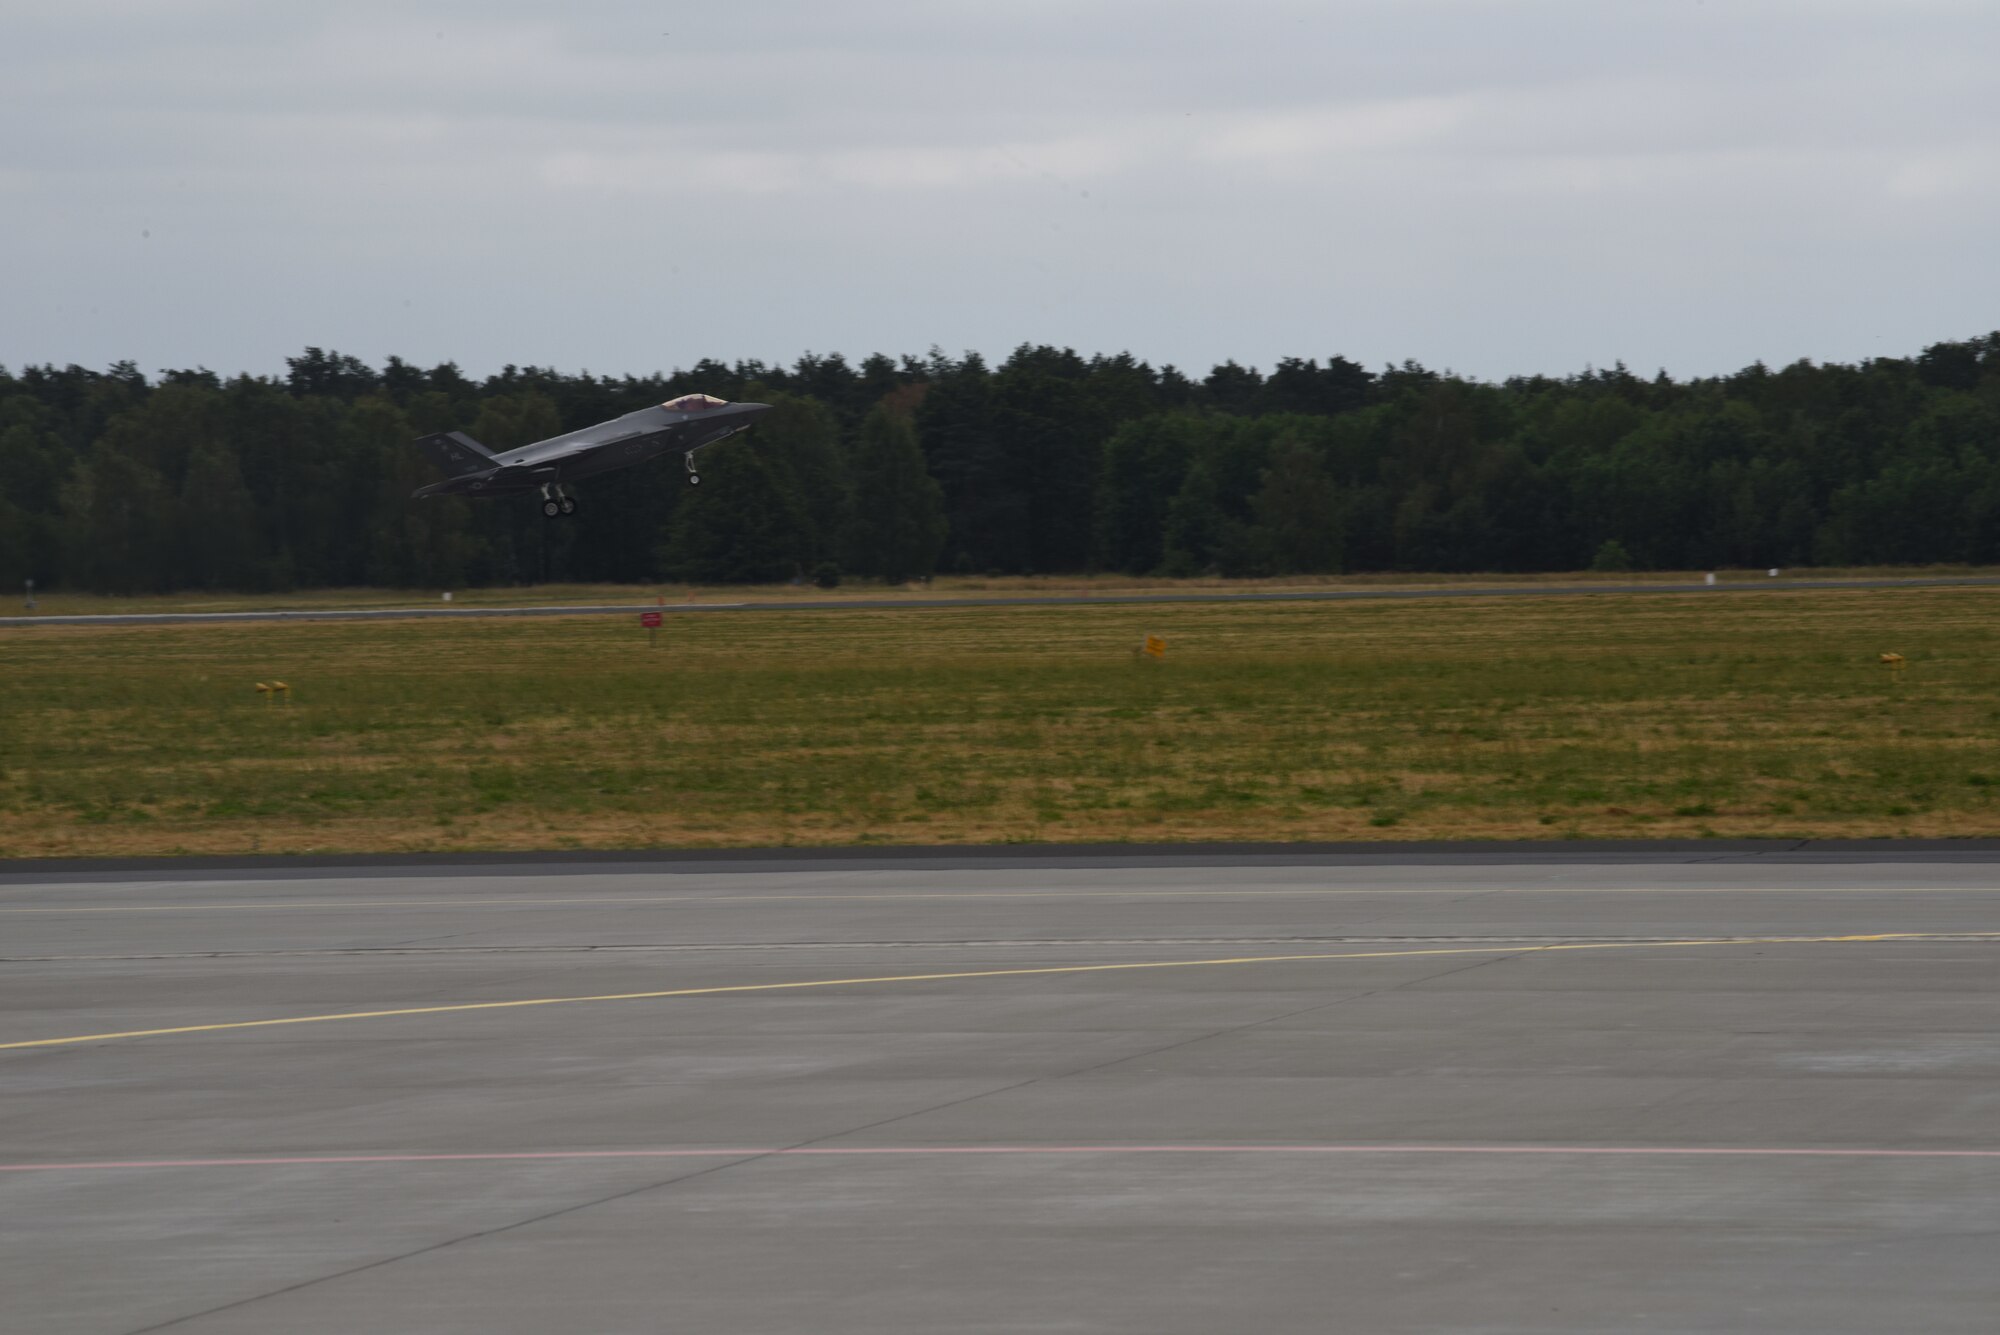 A U.S. Air Force F-35A Lightning II aircraft deployed from the 388th and 419th Fighter Wings, Hill Air Force Base, Utah, takes off during Operation Rapid Forge on Powidz Air Base, Poland, July, 16, 2019. This is the first time that a U.S. Air Force F-35A Lightning II aircraft has landed in Poland. Rapid Forge is a U.S. Air Forces in Europe-led mission to enhance readiness and test the ability to function at locations other than the main air bases.